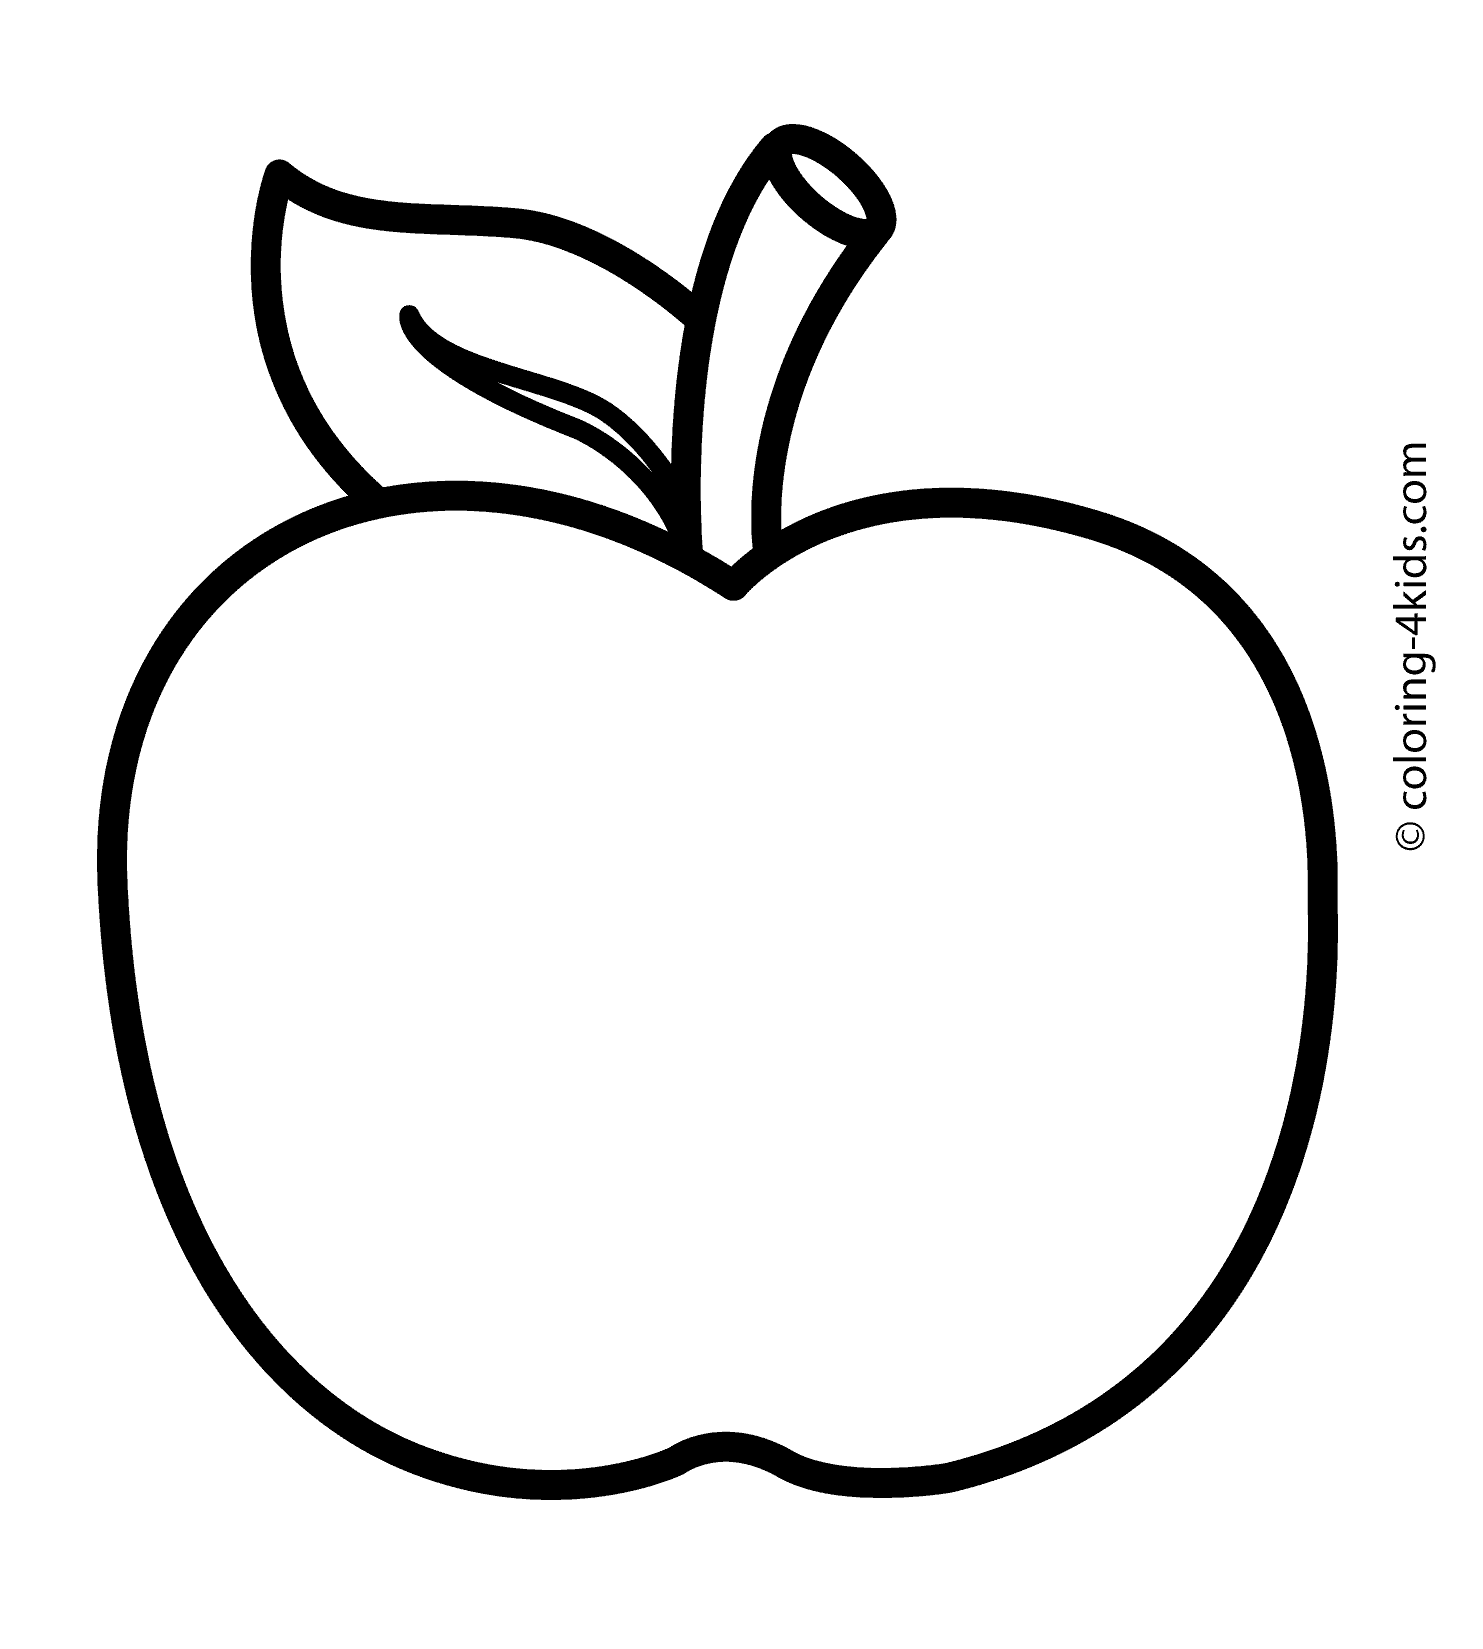 preschool apple coloring pages apple coloring pages fotolipcom rich image and wallpaper preschool pages coloring apple 